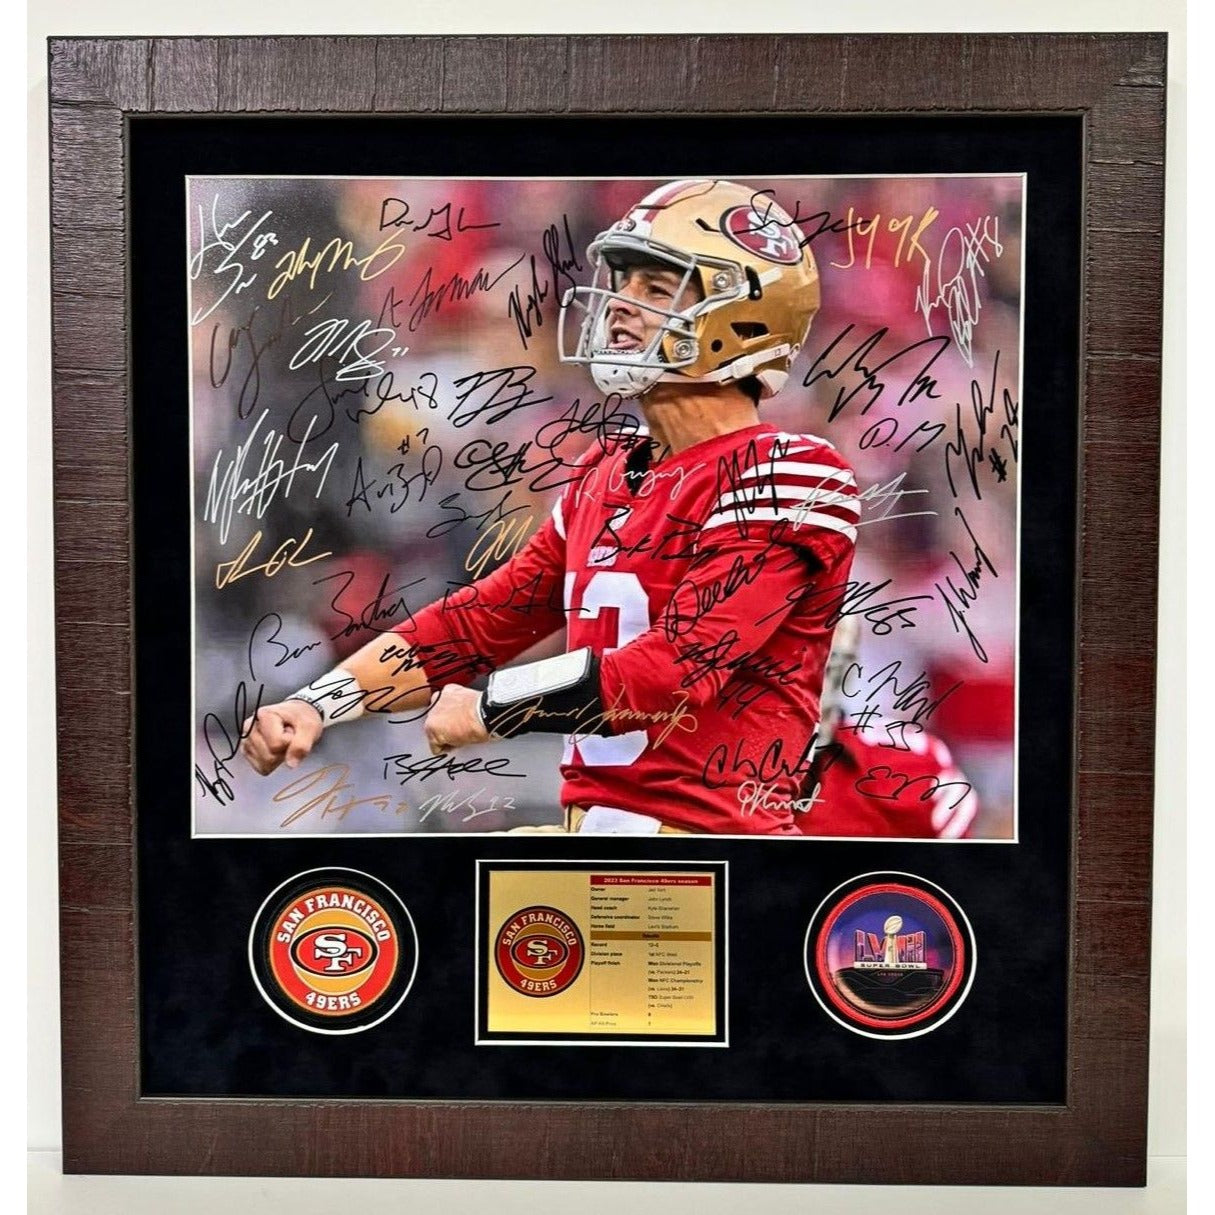 San Francisco 49ers2023 24 Deebo Samuel, Brock Purdy Christian McCaffrey 16x20 photo 40 plus signs team signed and framed (25x27) whit proof